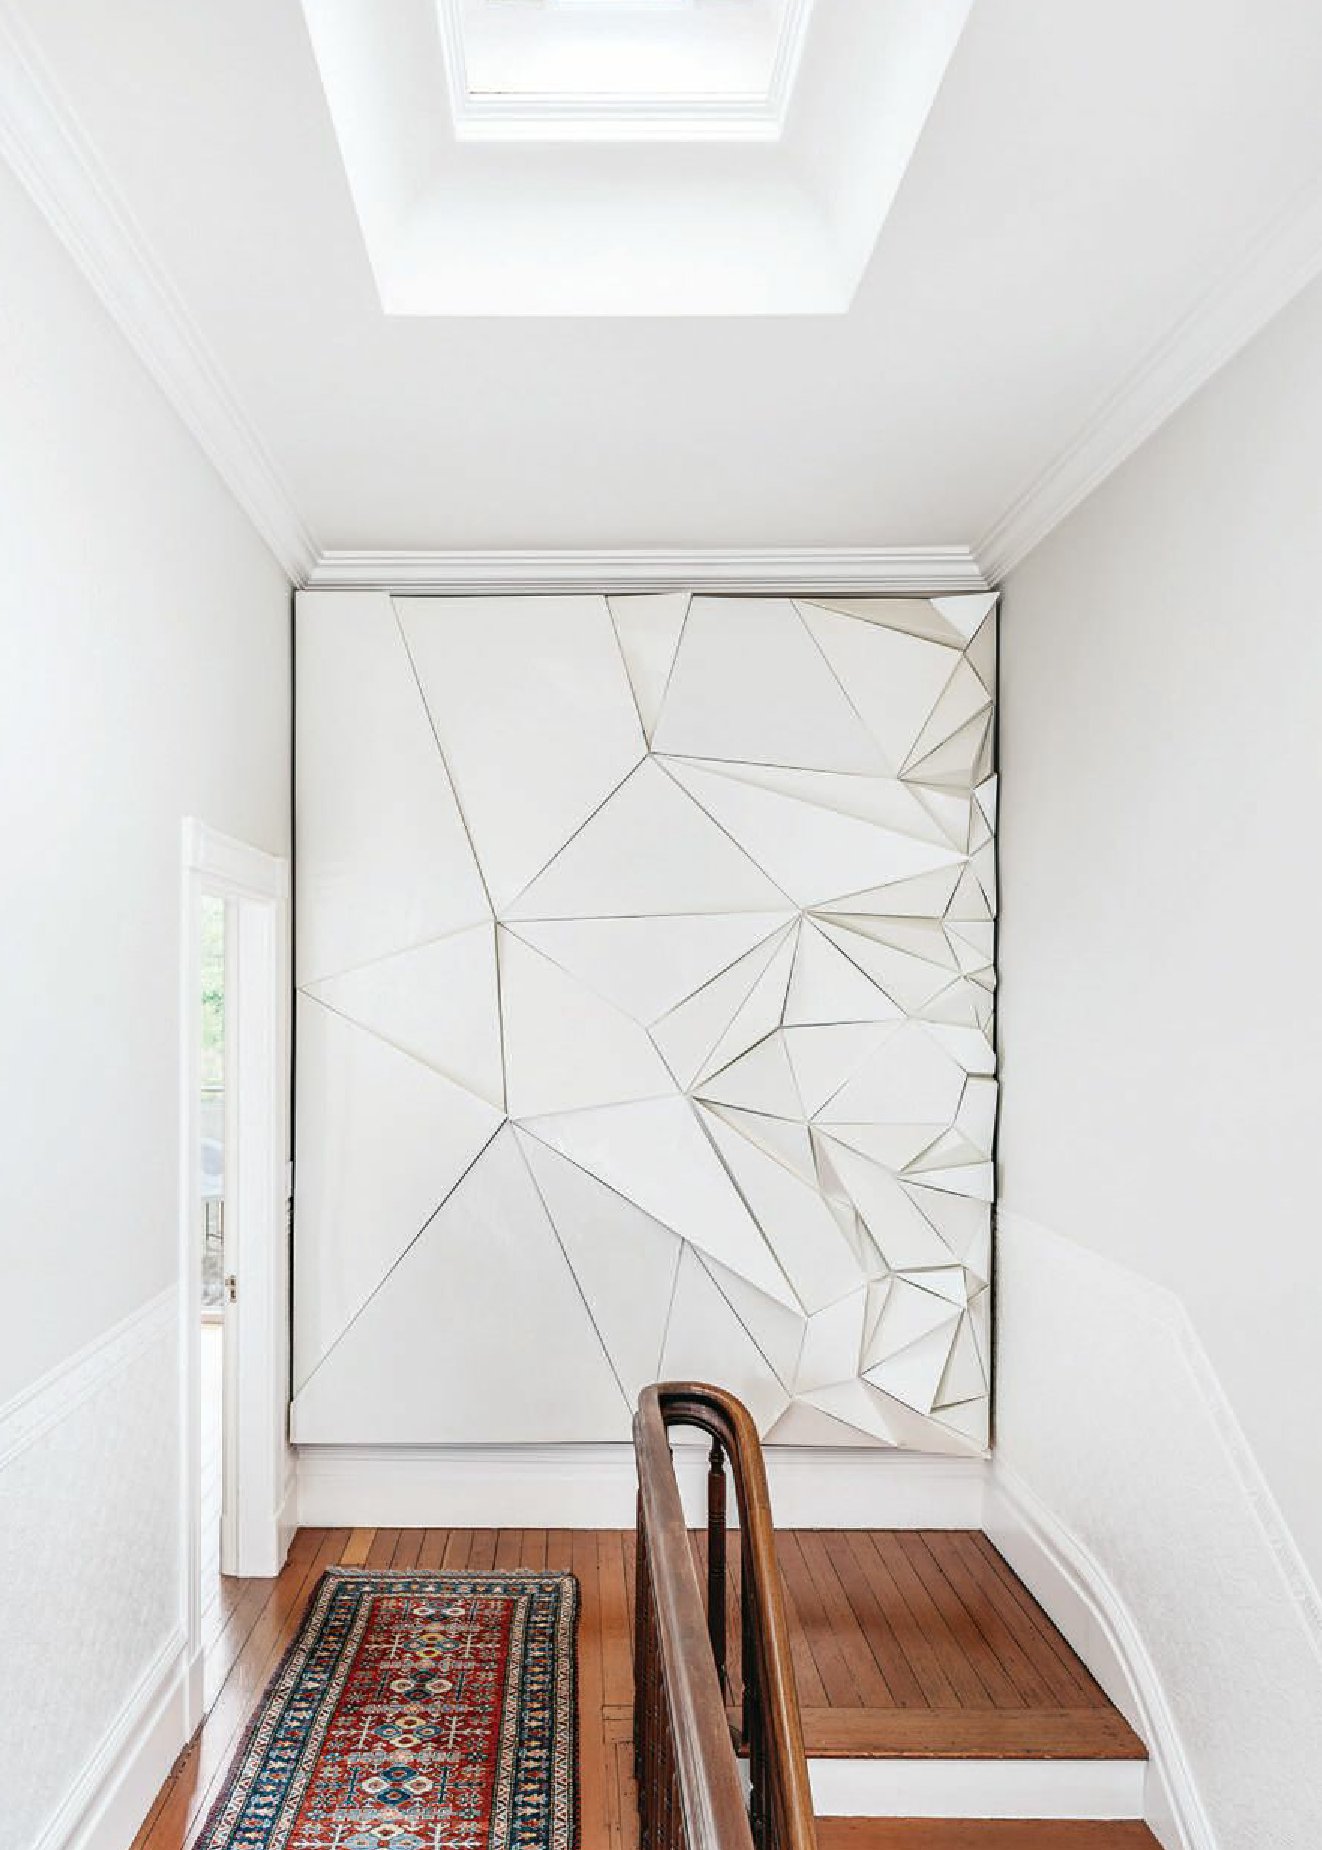 A wall sculpture by SF-based artist Jud Bergeron dominates the hallway PHOTOGRAPH BY CHRISTOPHER STARK